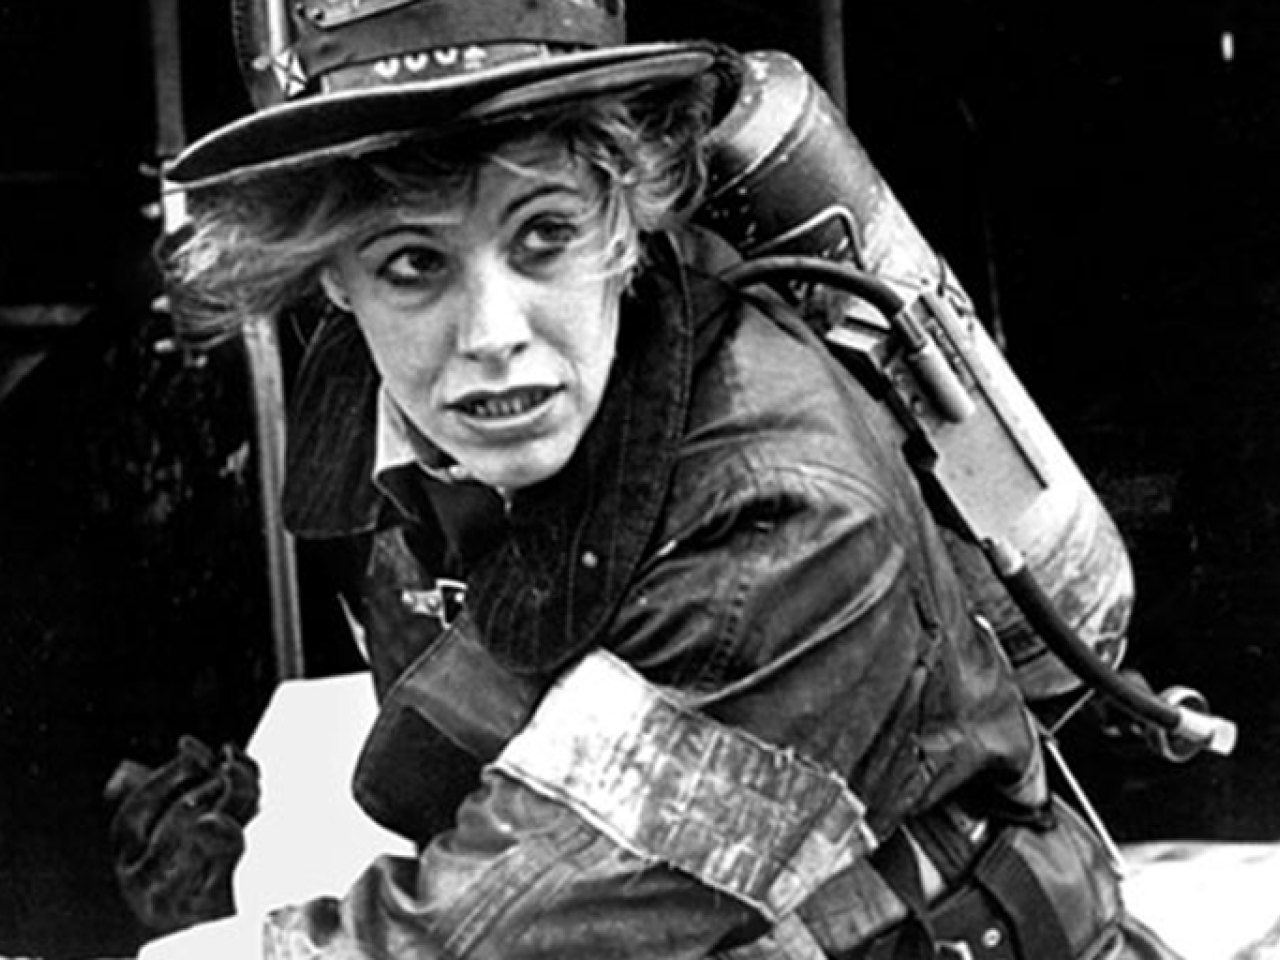 In this black and white still from the film, a female firefighter is fully geared up in a heavy coat, gloves and helmet as she races at the scene of a fire. She wears an oxygen tank on her back and looks out towards the distance, with determination on her face.